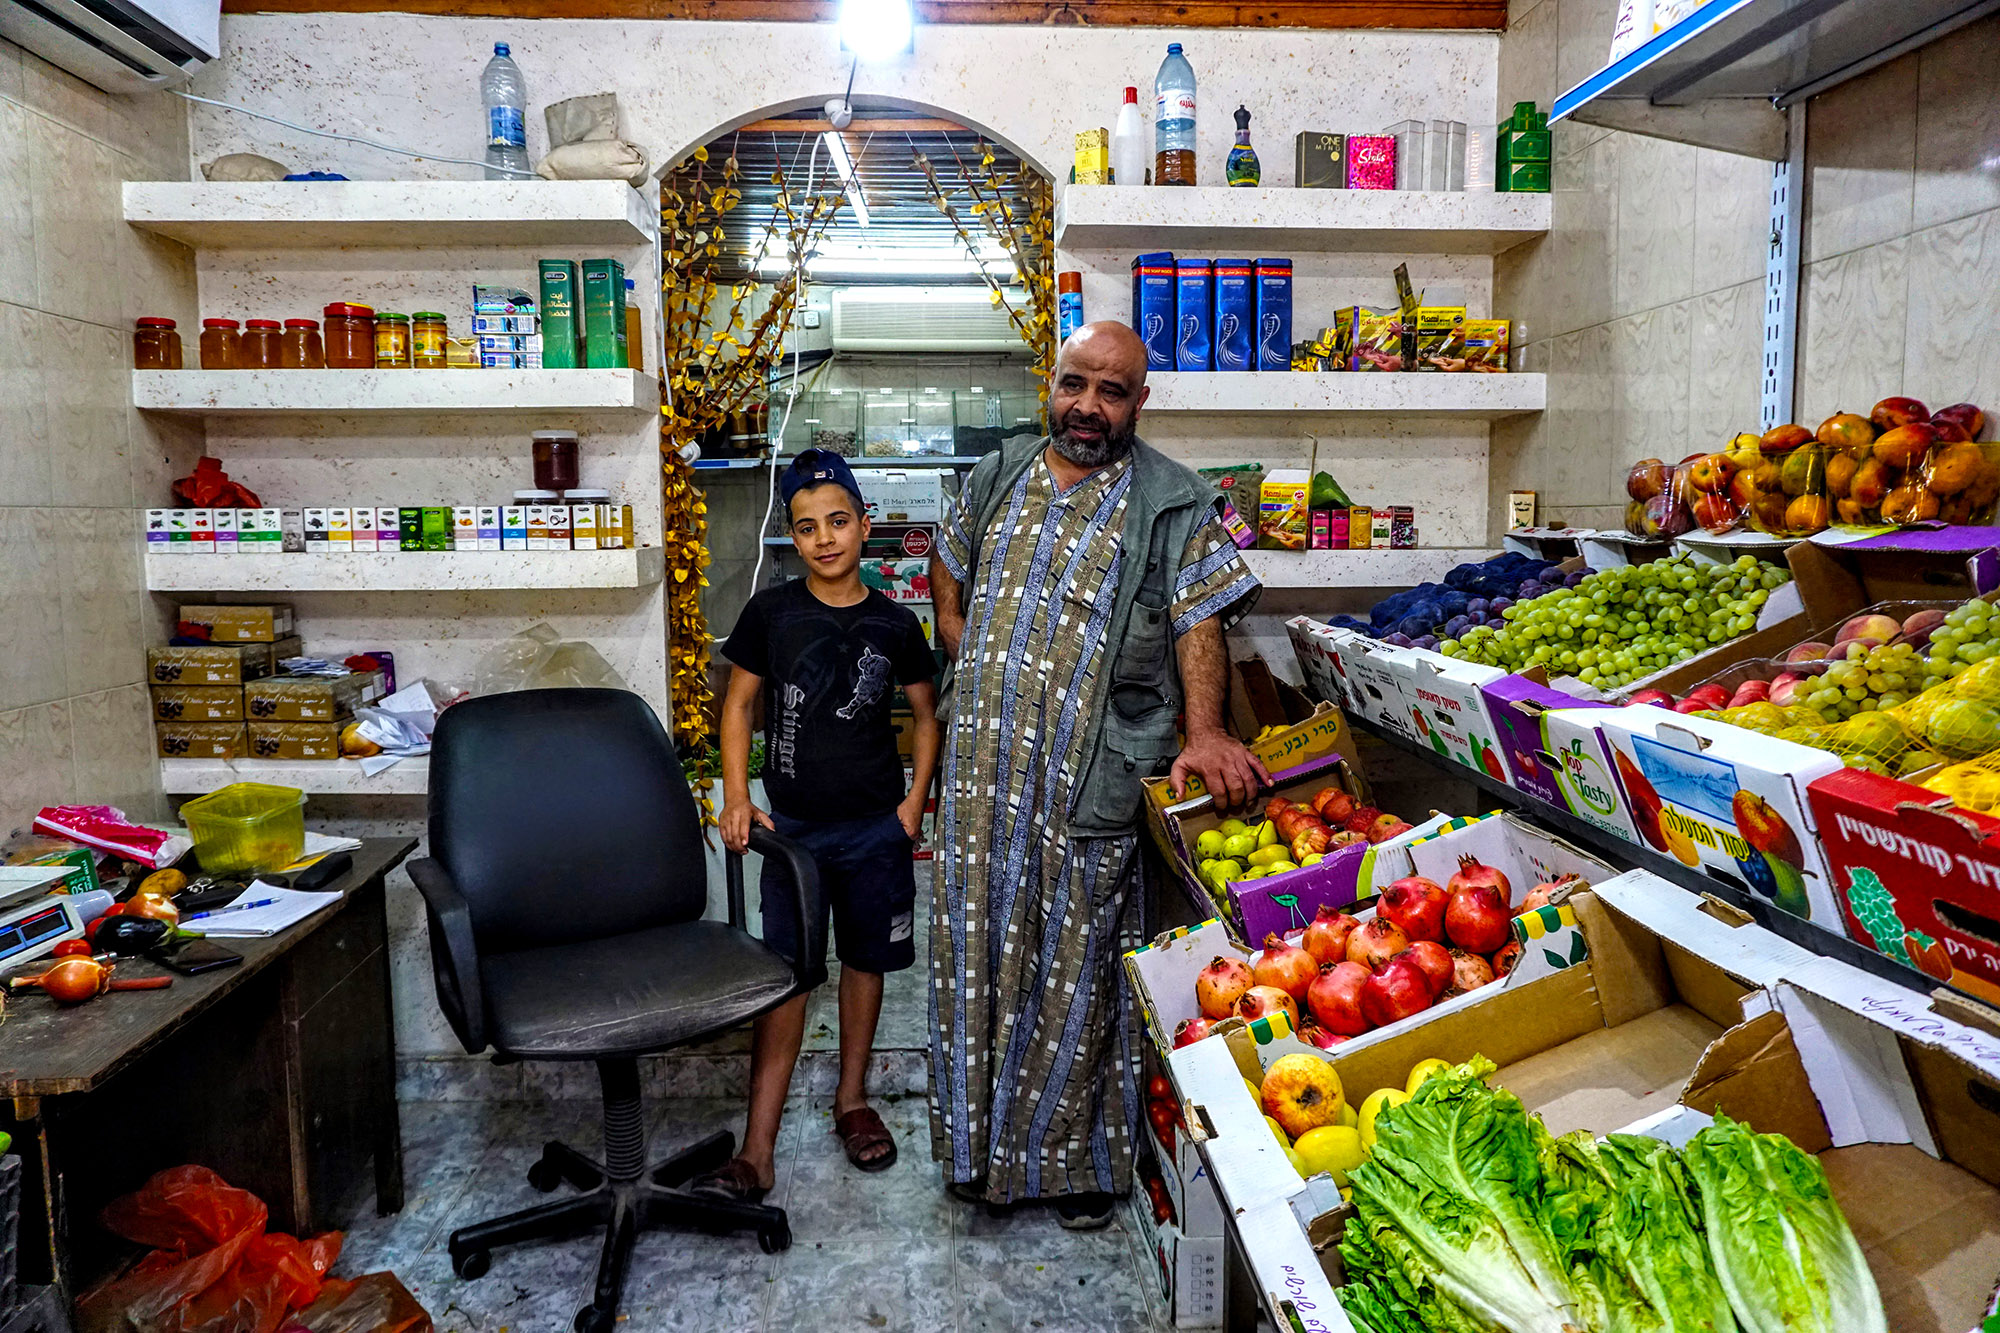 Raed and his son Ghaith sell fruits and spices in the Balata market.